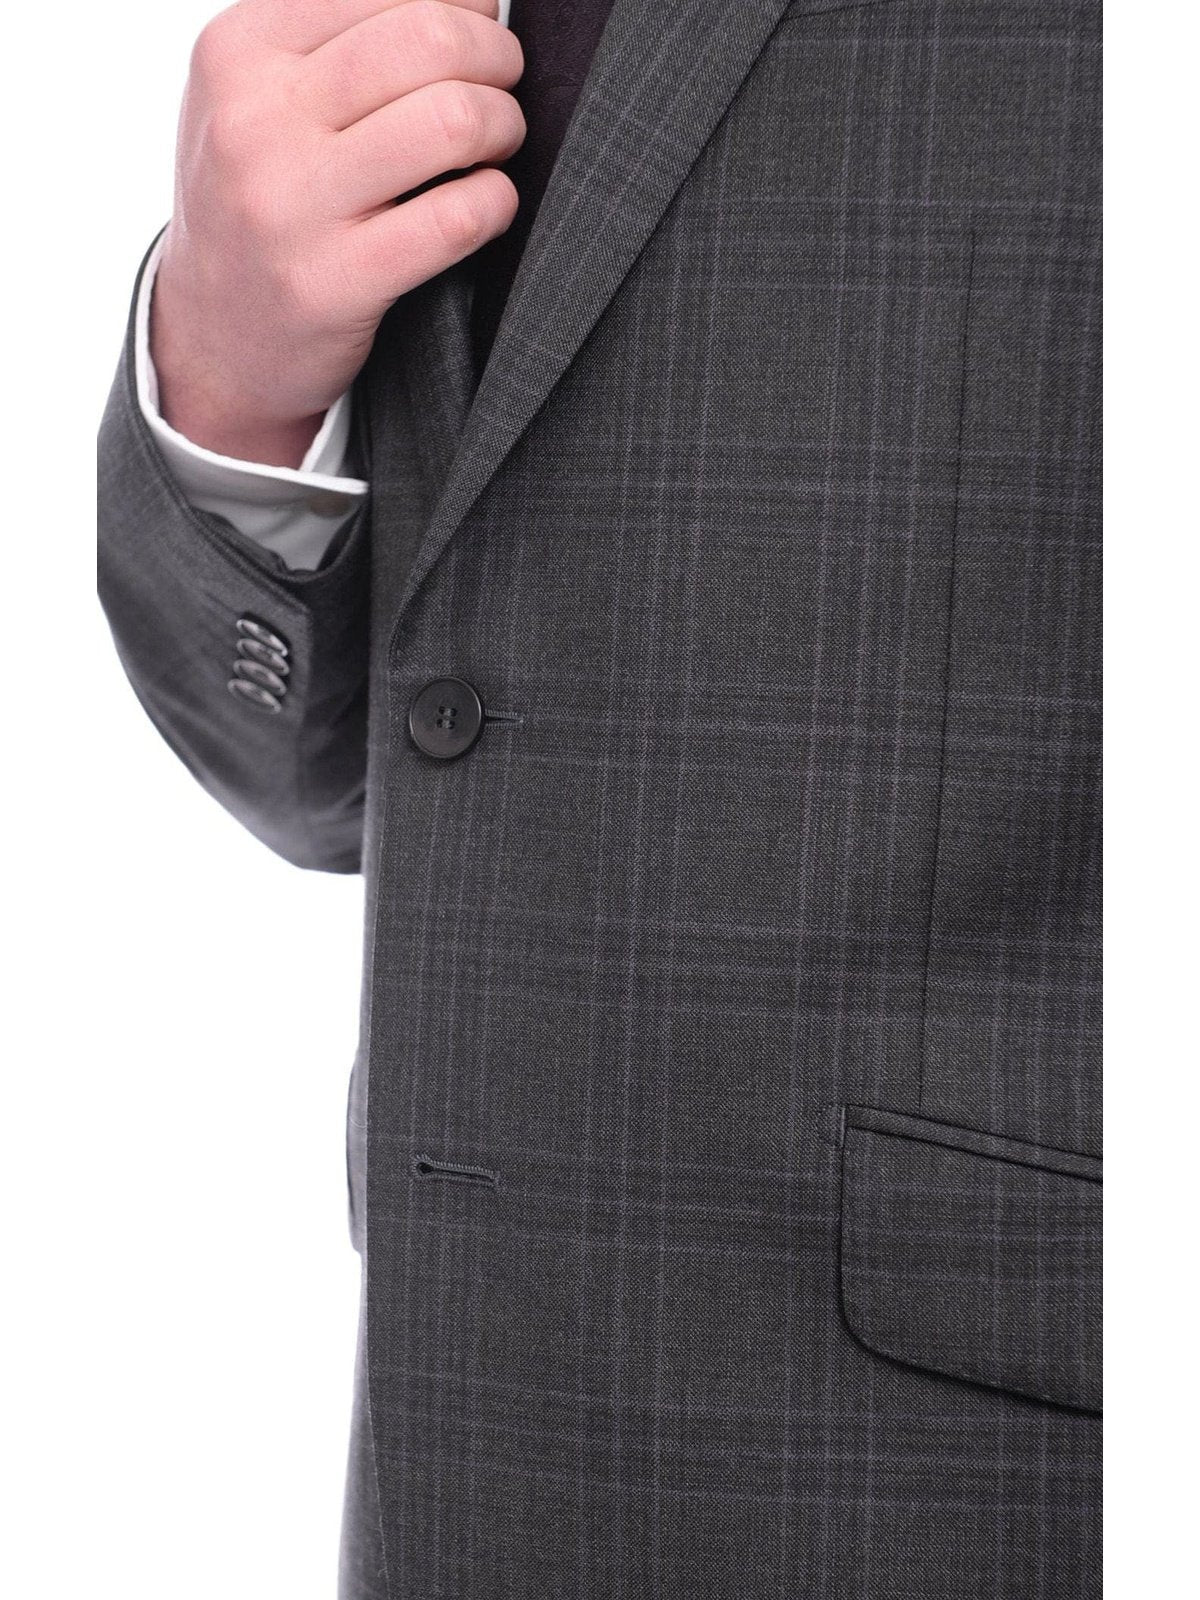 Napoli TWO PIECE SUITS Napoli Classic Fit Charcoal Gray Plaid Half Canvassed Super 150s Wool Suit